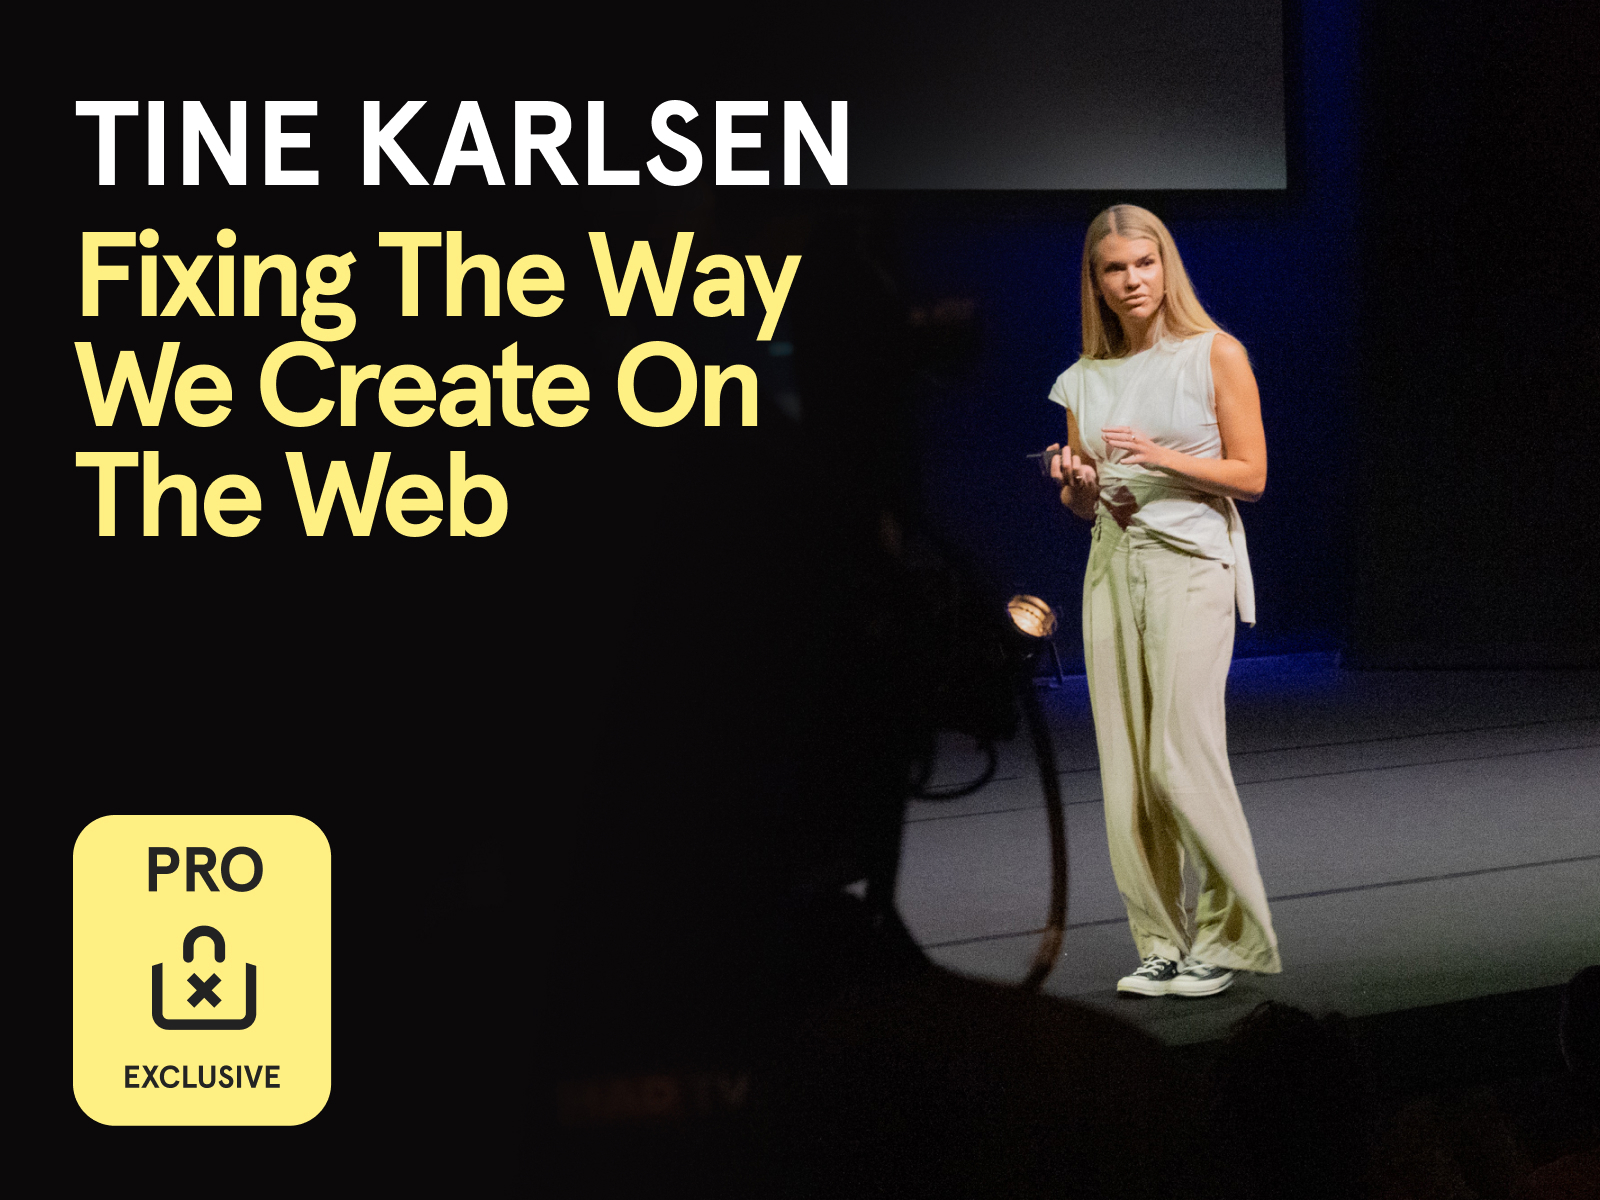 New PRO Content available: watch Tine Karlsen's new talk from Awwwards Conference Amsterdam